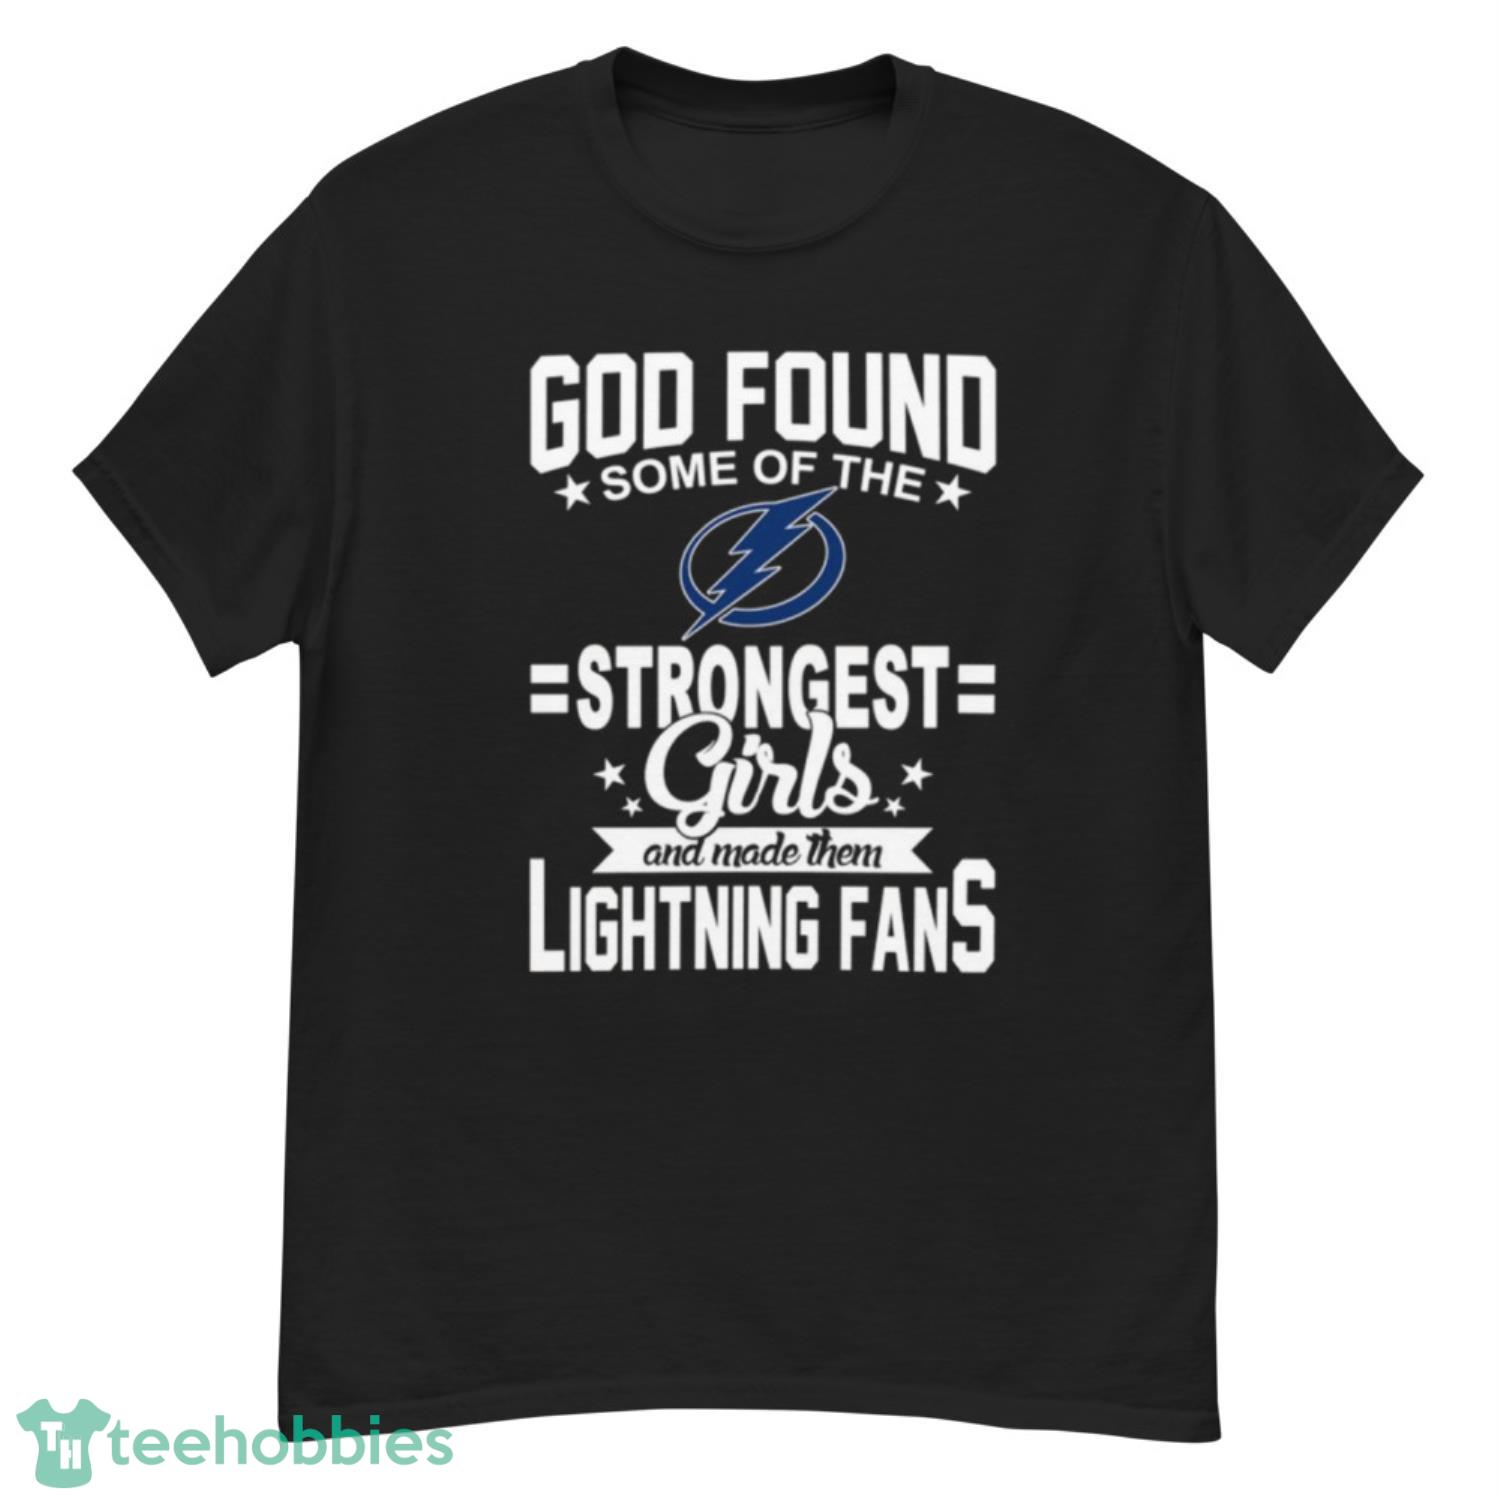 Tampa Bay Lightning NHL Football God Found Some Of The Strongest Girls Adoring Fans T Shirt - G500 Men’s Classic T-Shirt